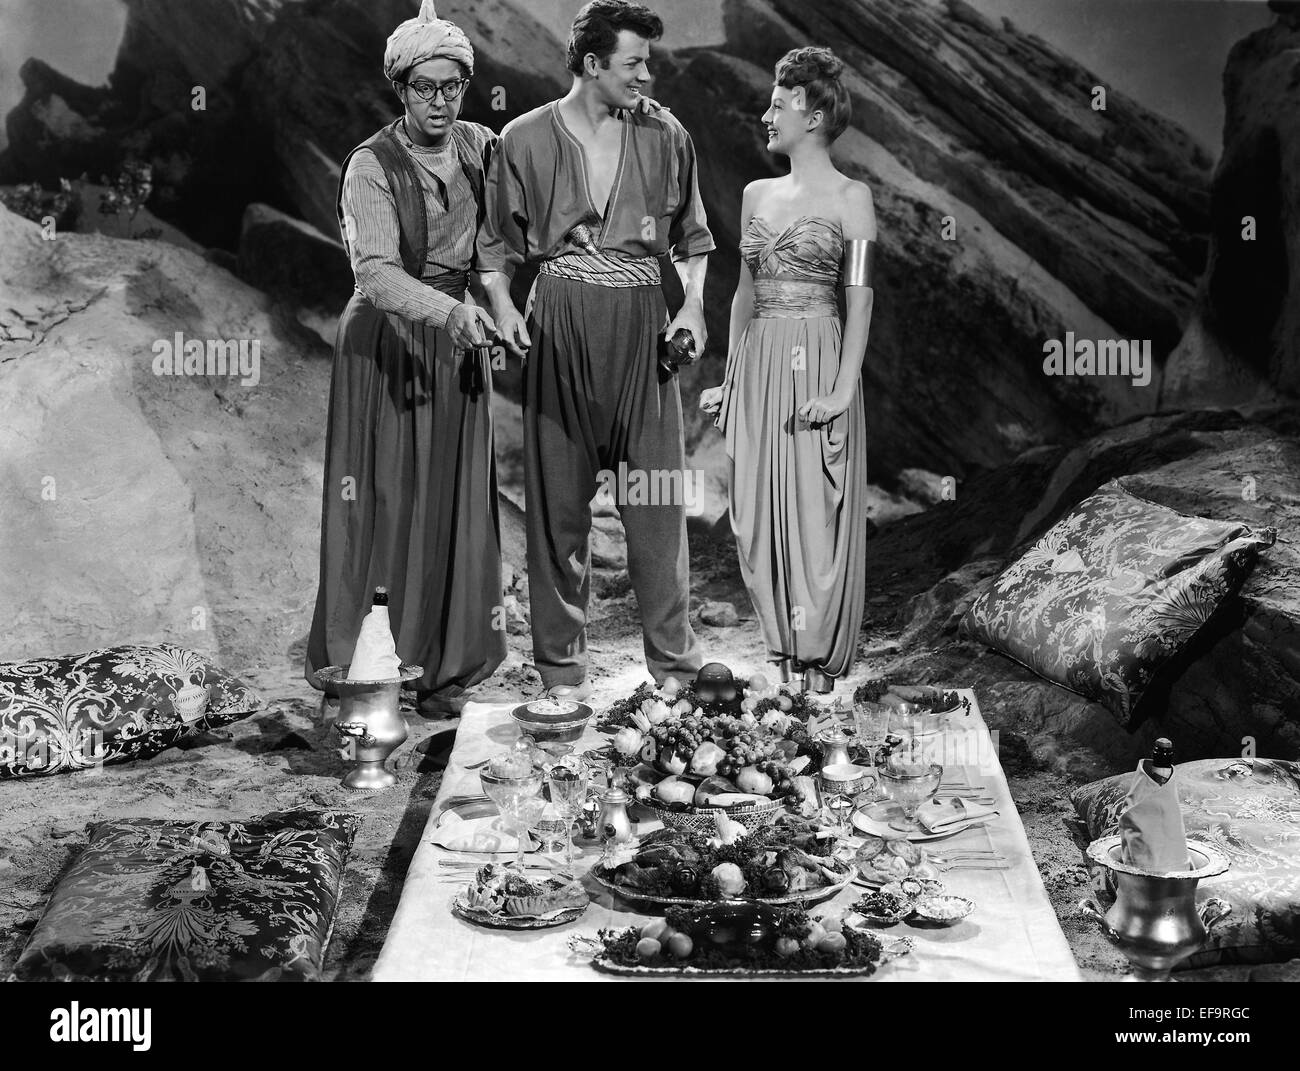 CORNEL WILDE, EVELYN KEYES, PHIL SILVERS, A THOUSAND AND ONE NIGHTS, 1945  Stock Photo - Alamy